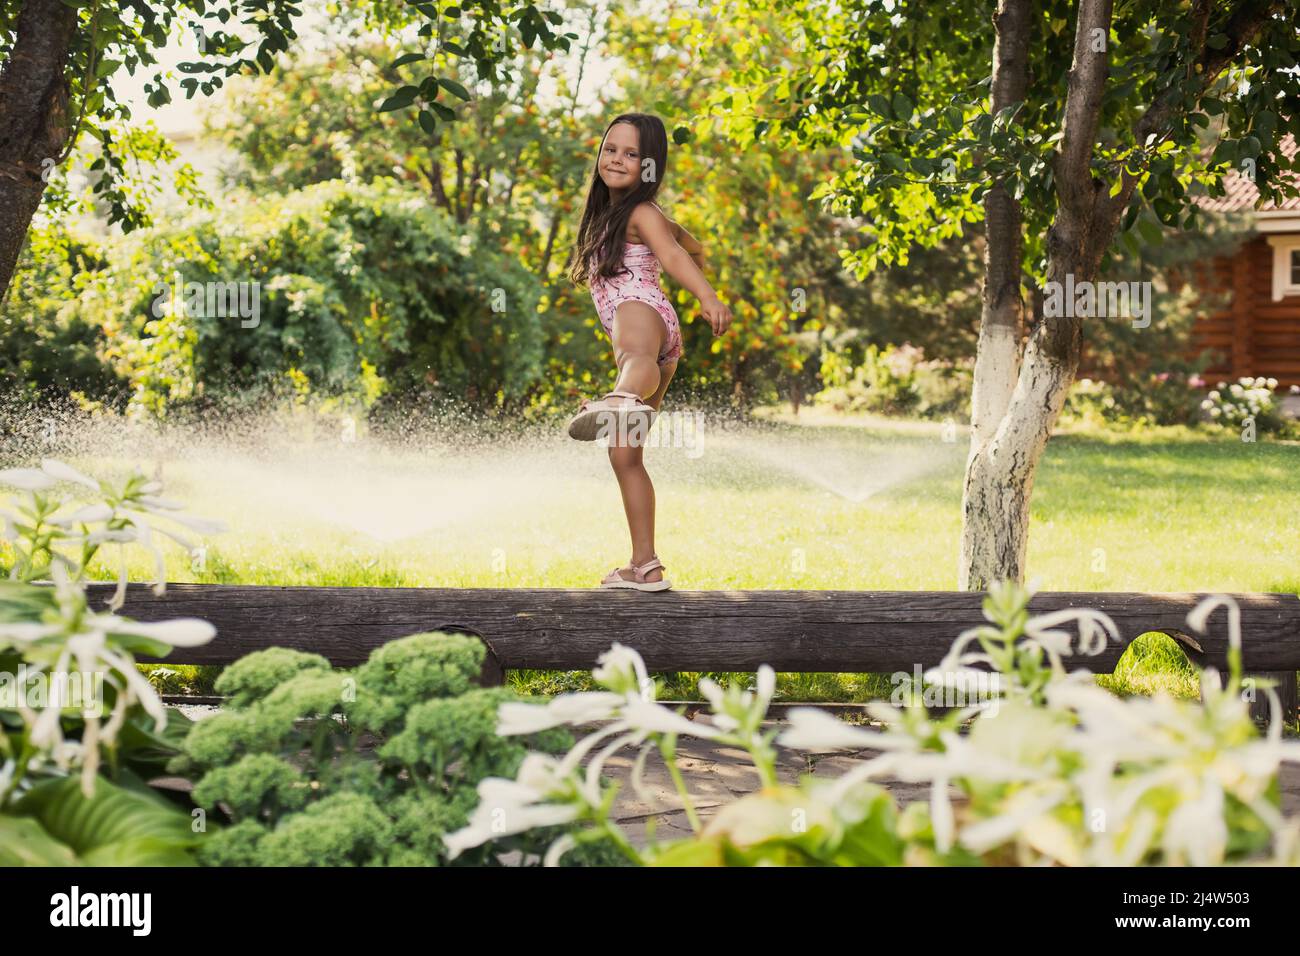 Young cheerful girl walking on log smiling balancing looking at camera with water sprinklers, greenary and house in background in daytime. Dreaming to Stock Photo